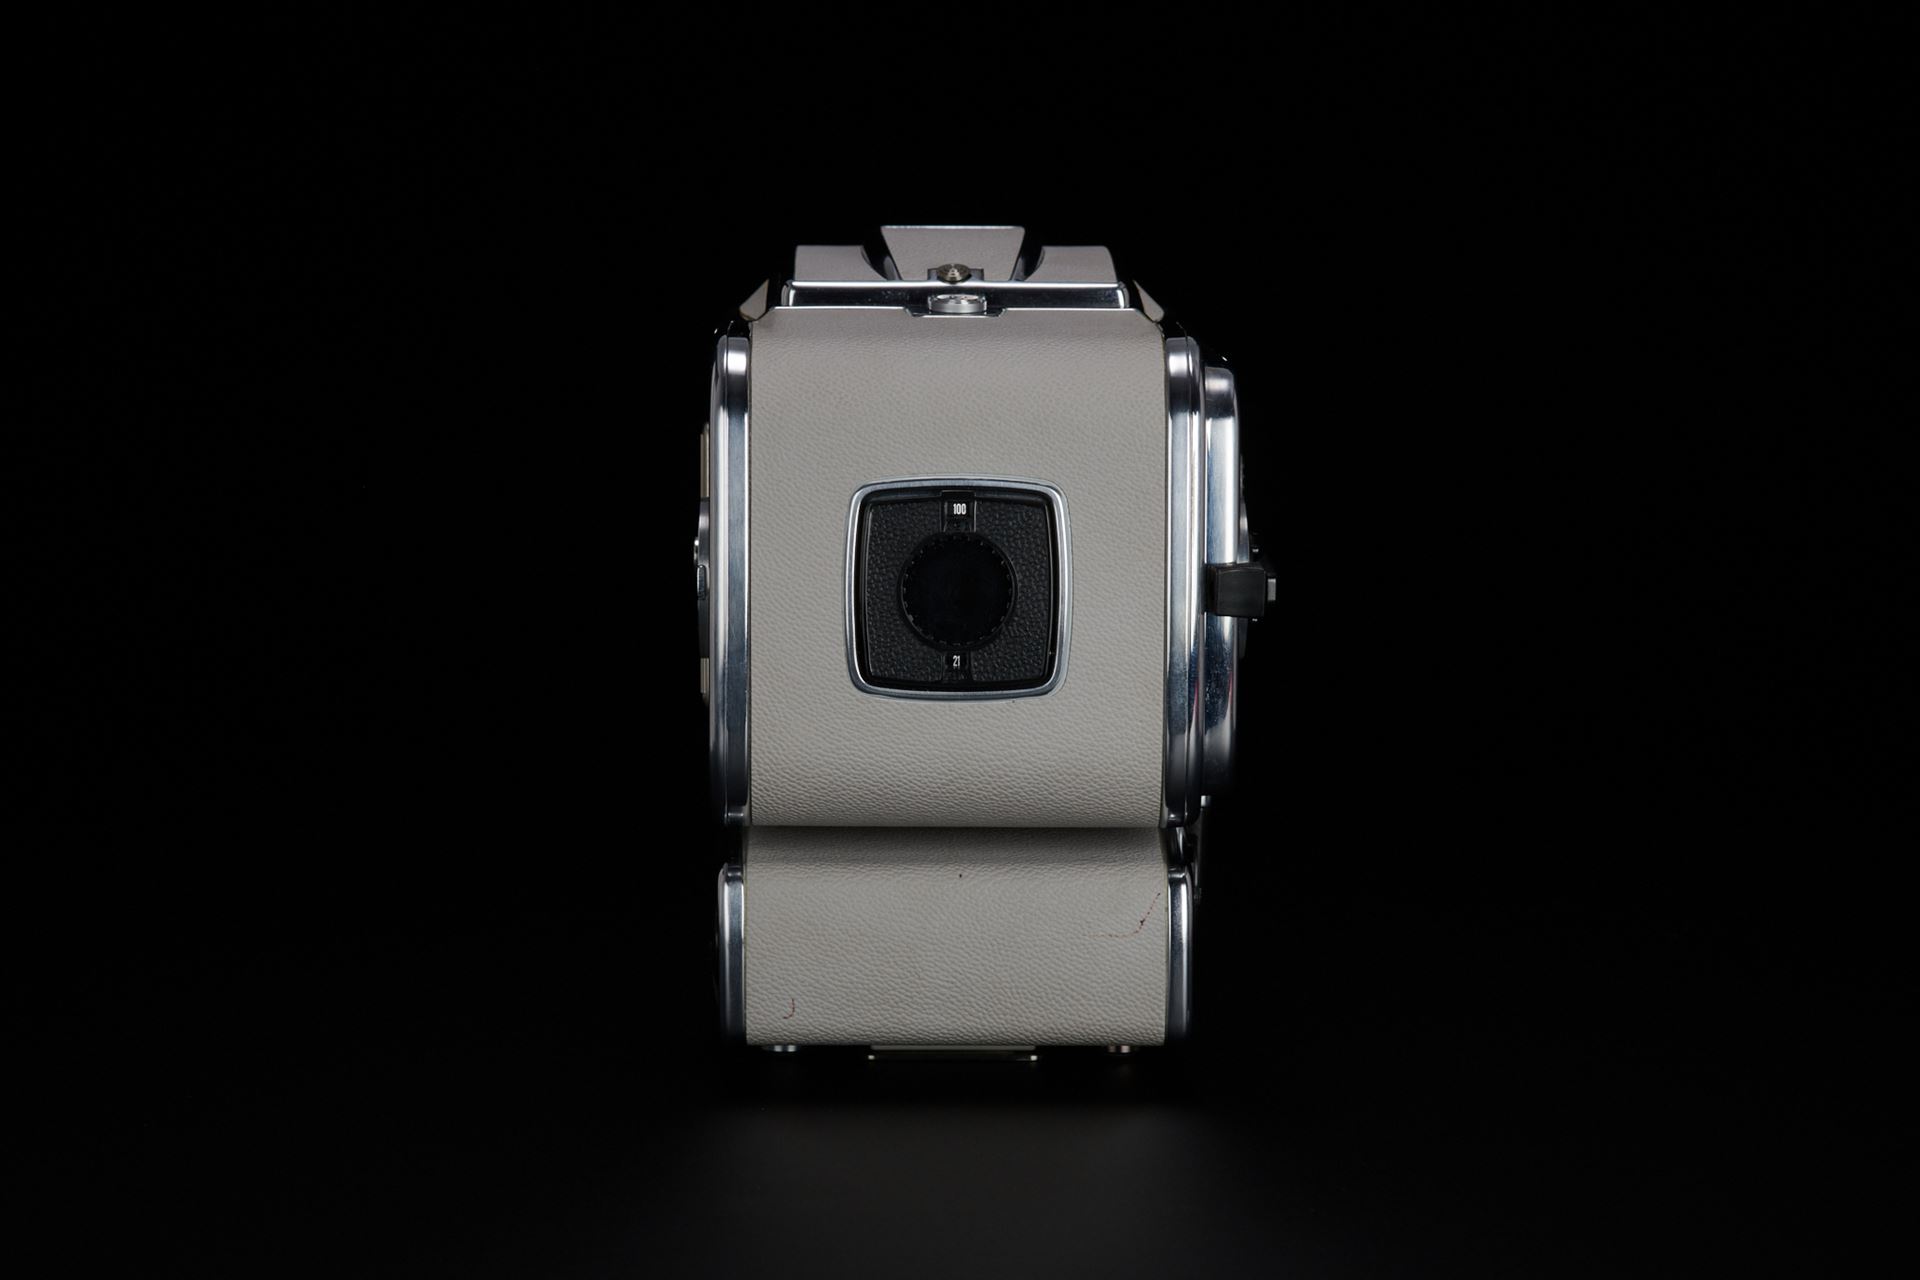 Picture of hasselblad 500el/m "20 years in space"